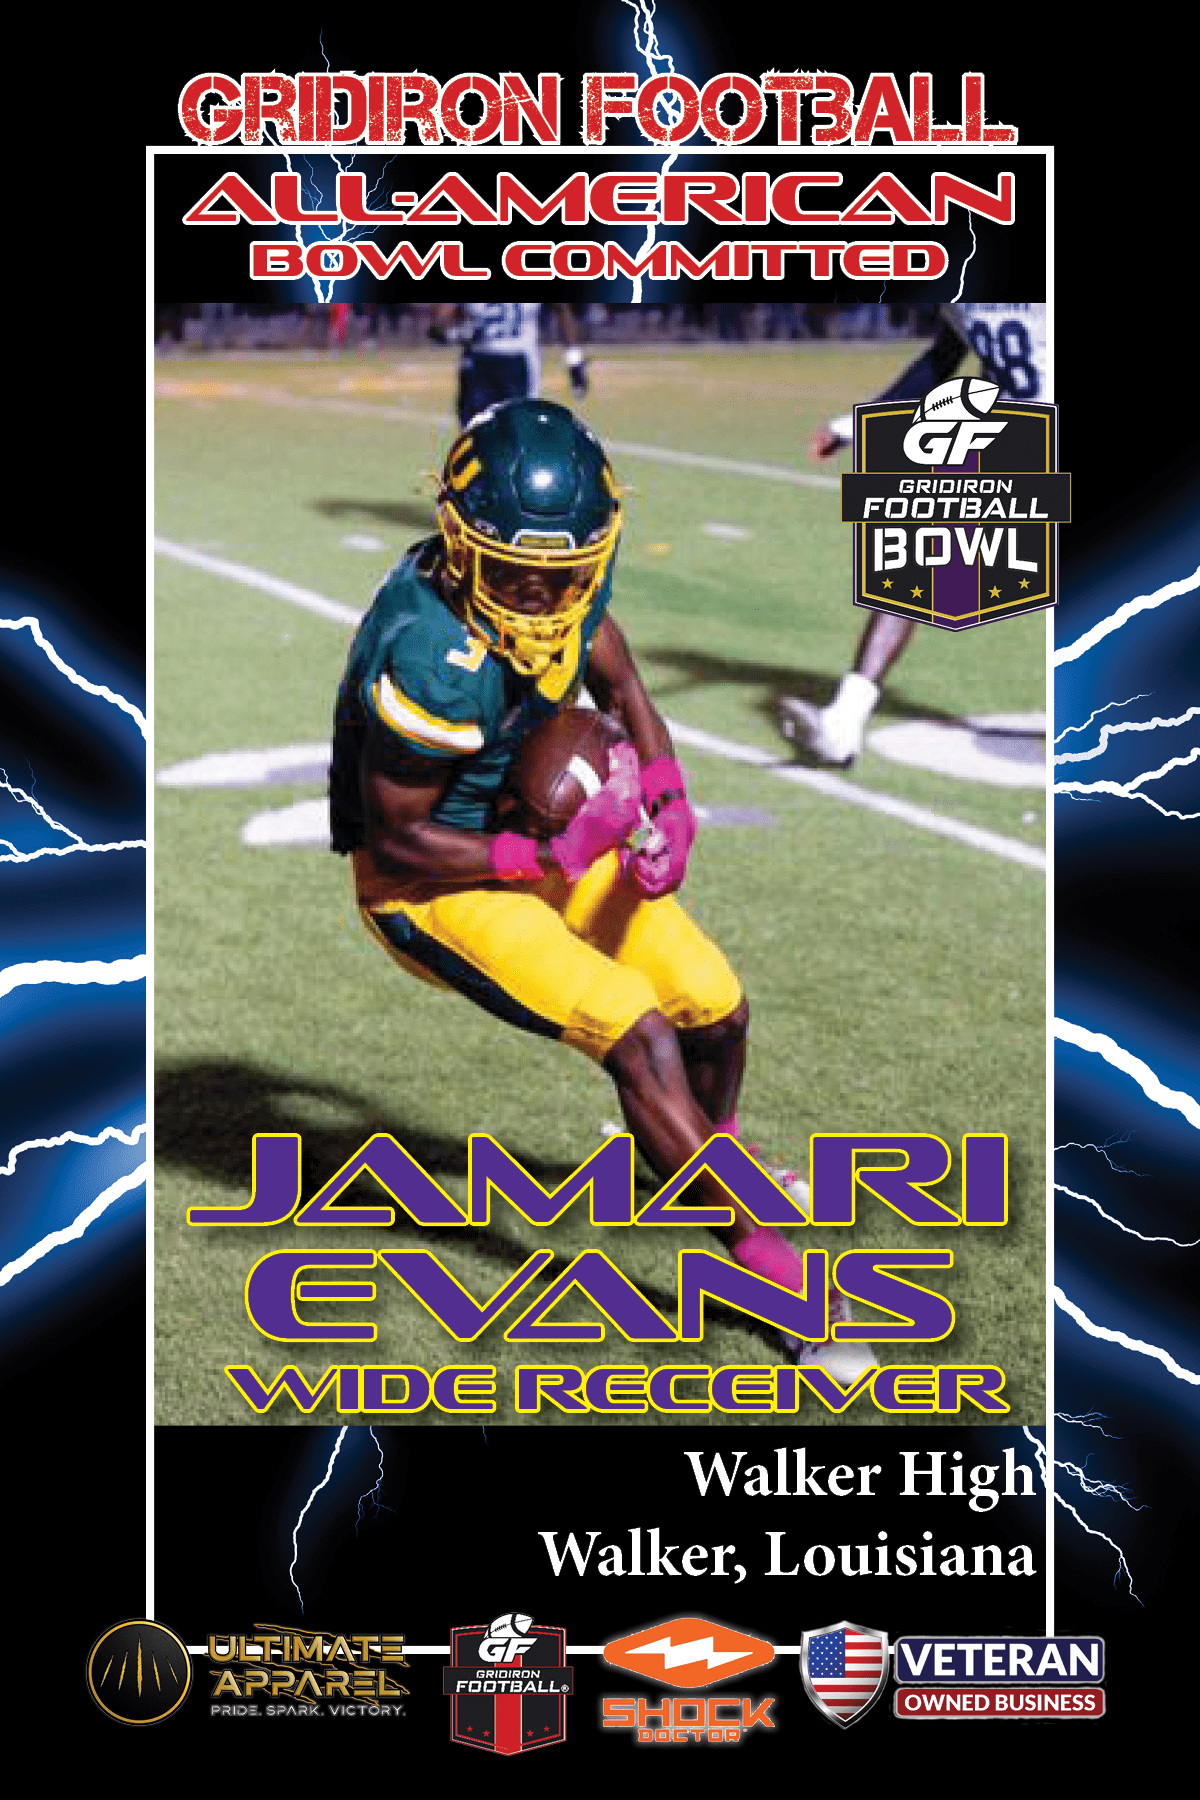 BREAKING NEWS: Walker High School (La.) WR Jamari Evans has committed to the 2023 Gridiron Football All-American Bowl!